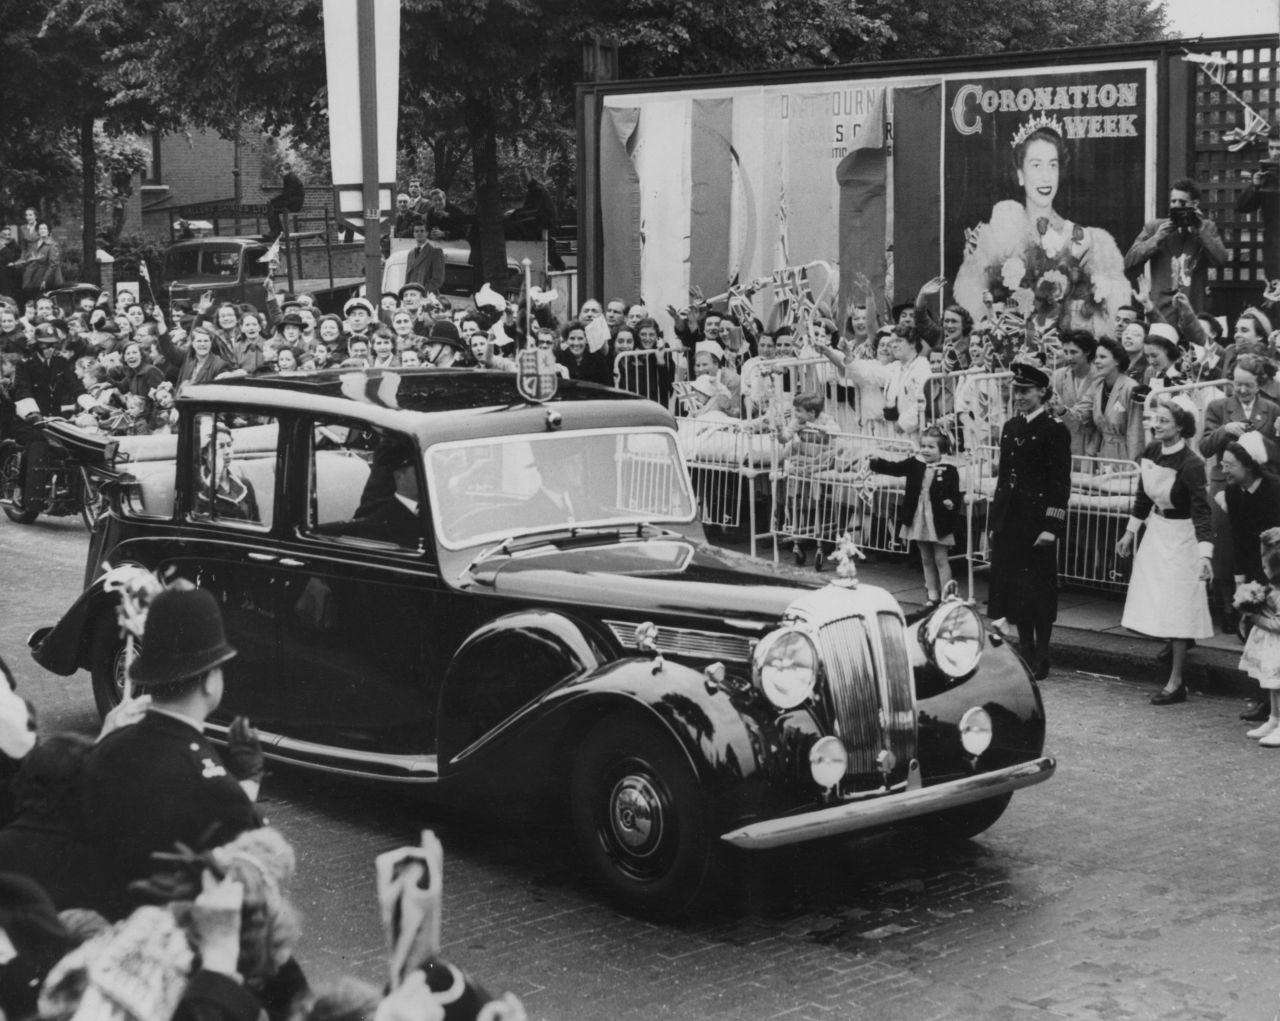 4th June 1953: Children wave as Queen Elizabeth II passes by in her car, at North Kensington, London.